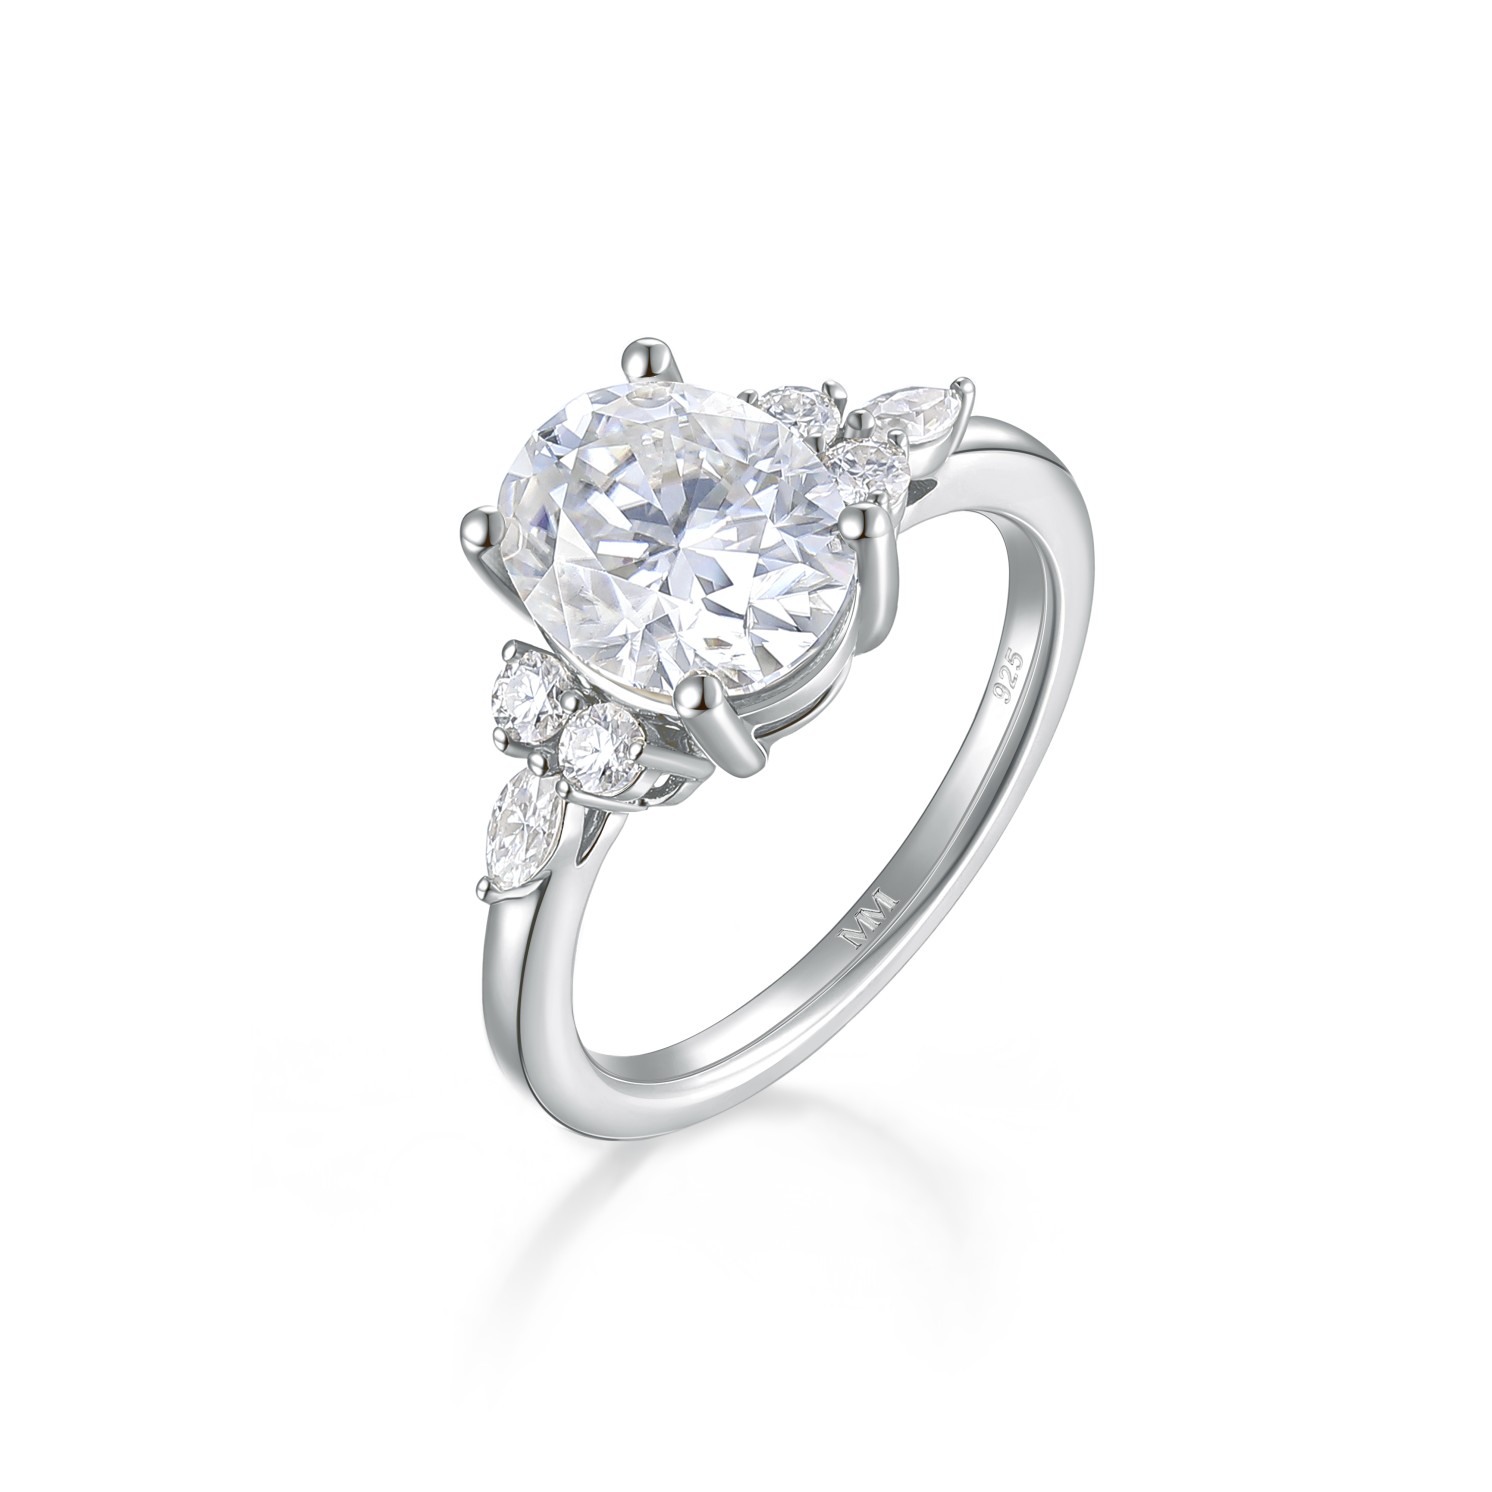 Lustrina - Oval Moissanite Ring with Dazzling Accents